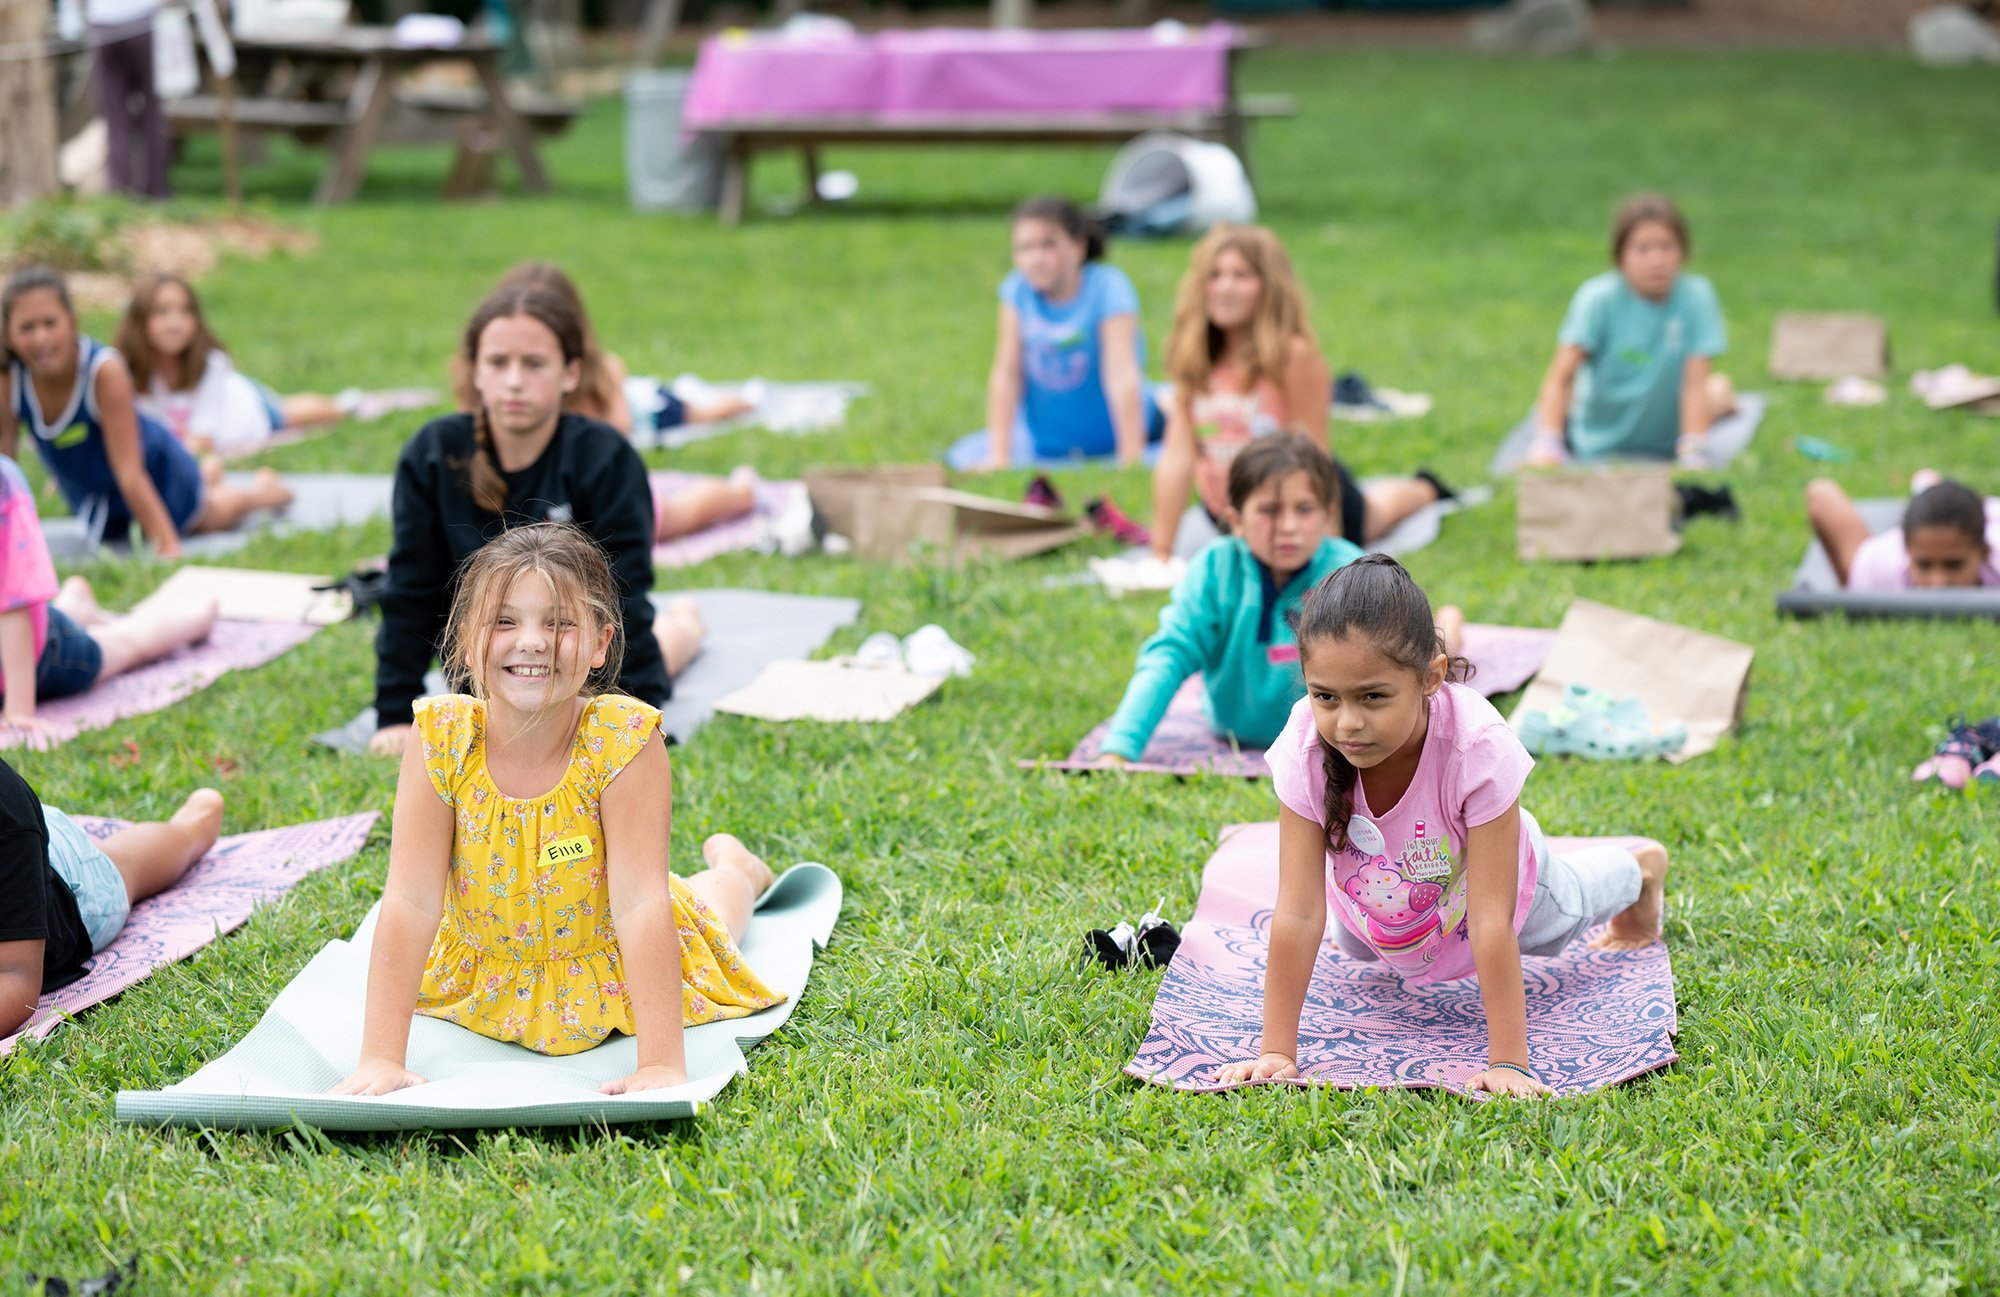 Girls doing yoga in a park 